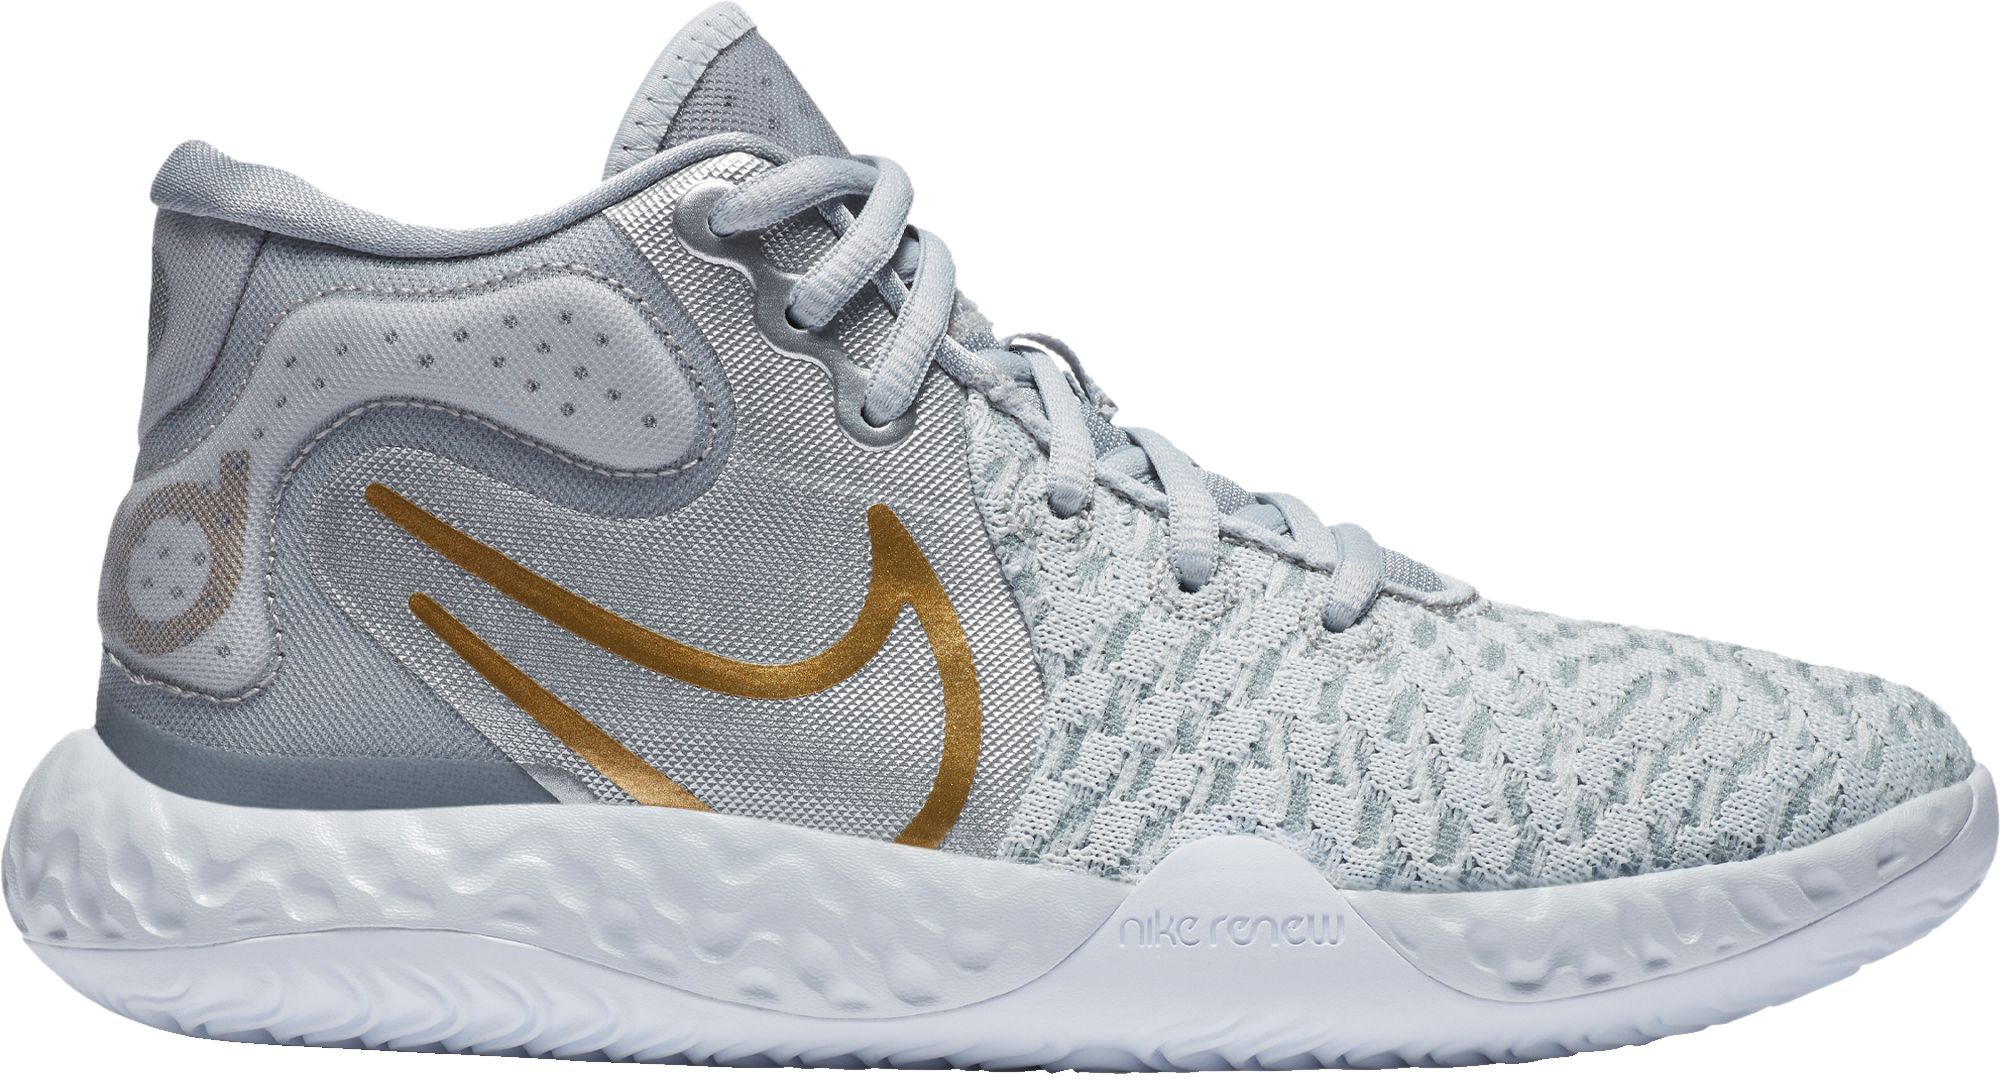 kd trey 5 white and gold